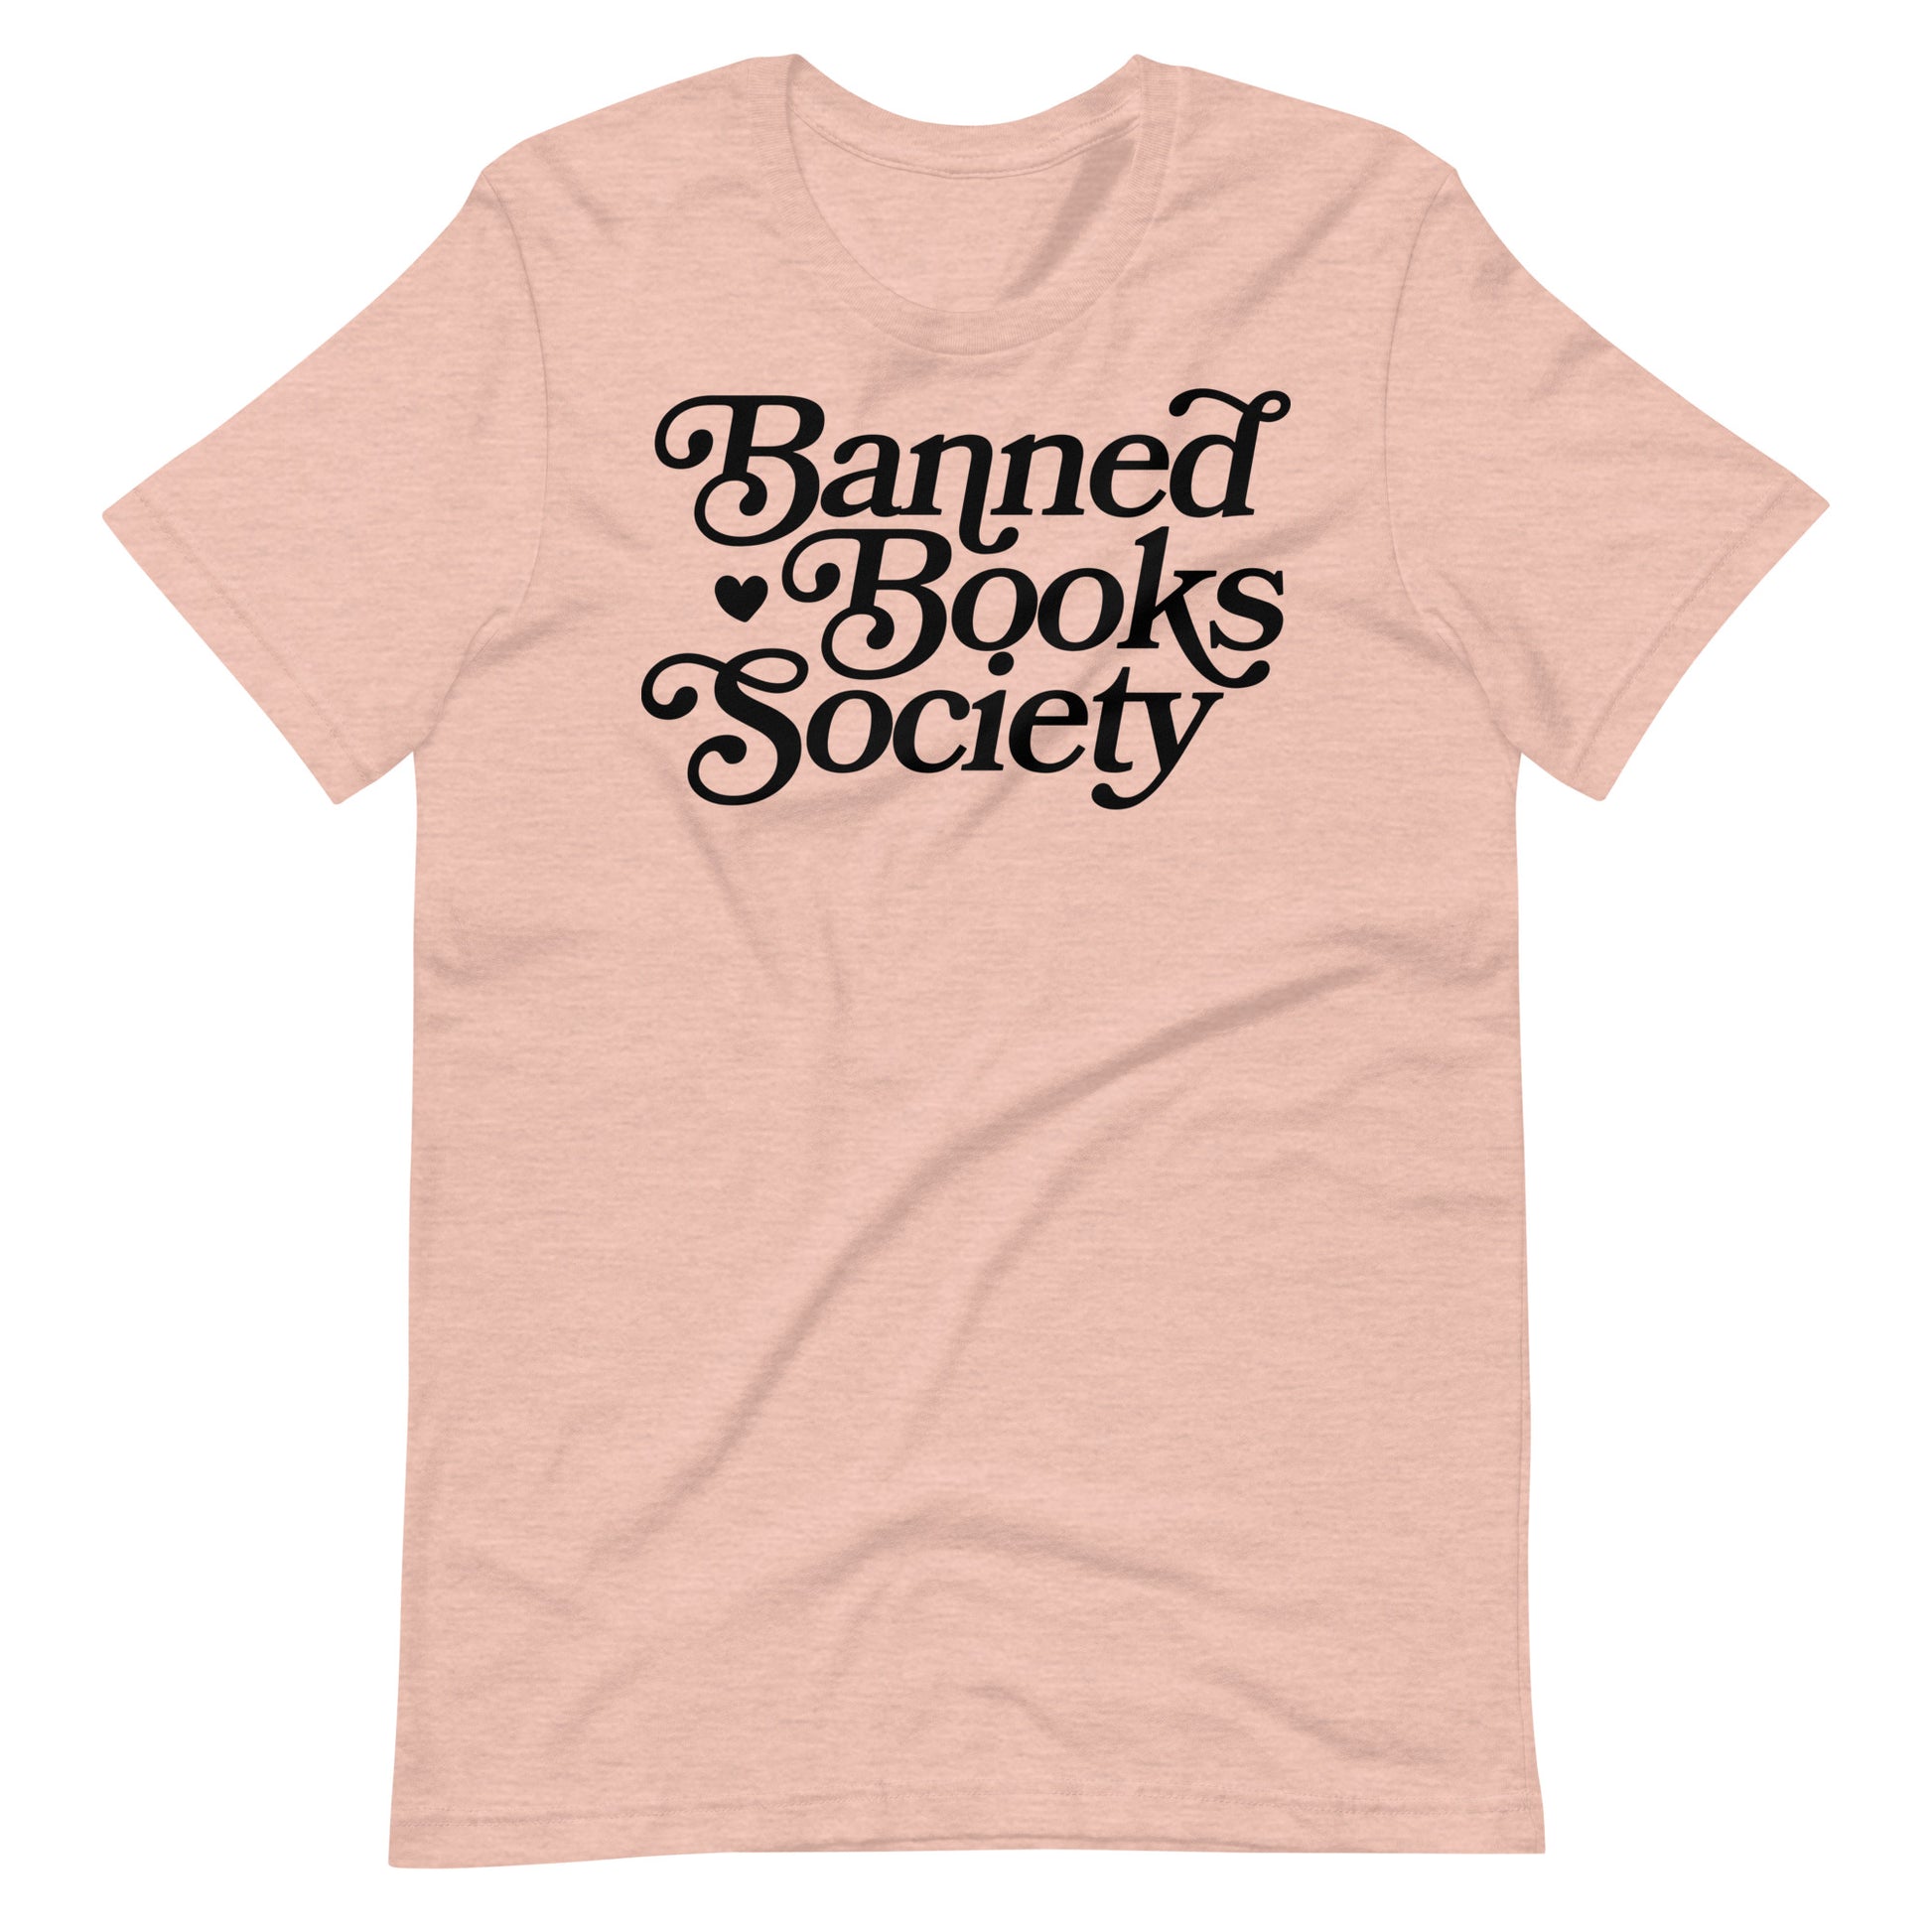 Banned Books Society Librarian T-Shirt - Premium Quality, Unisex Fit